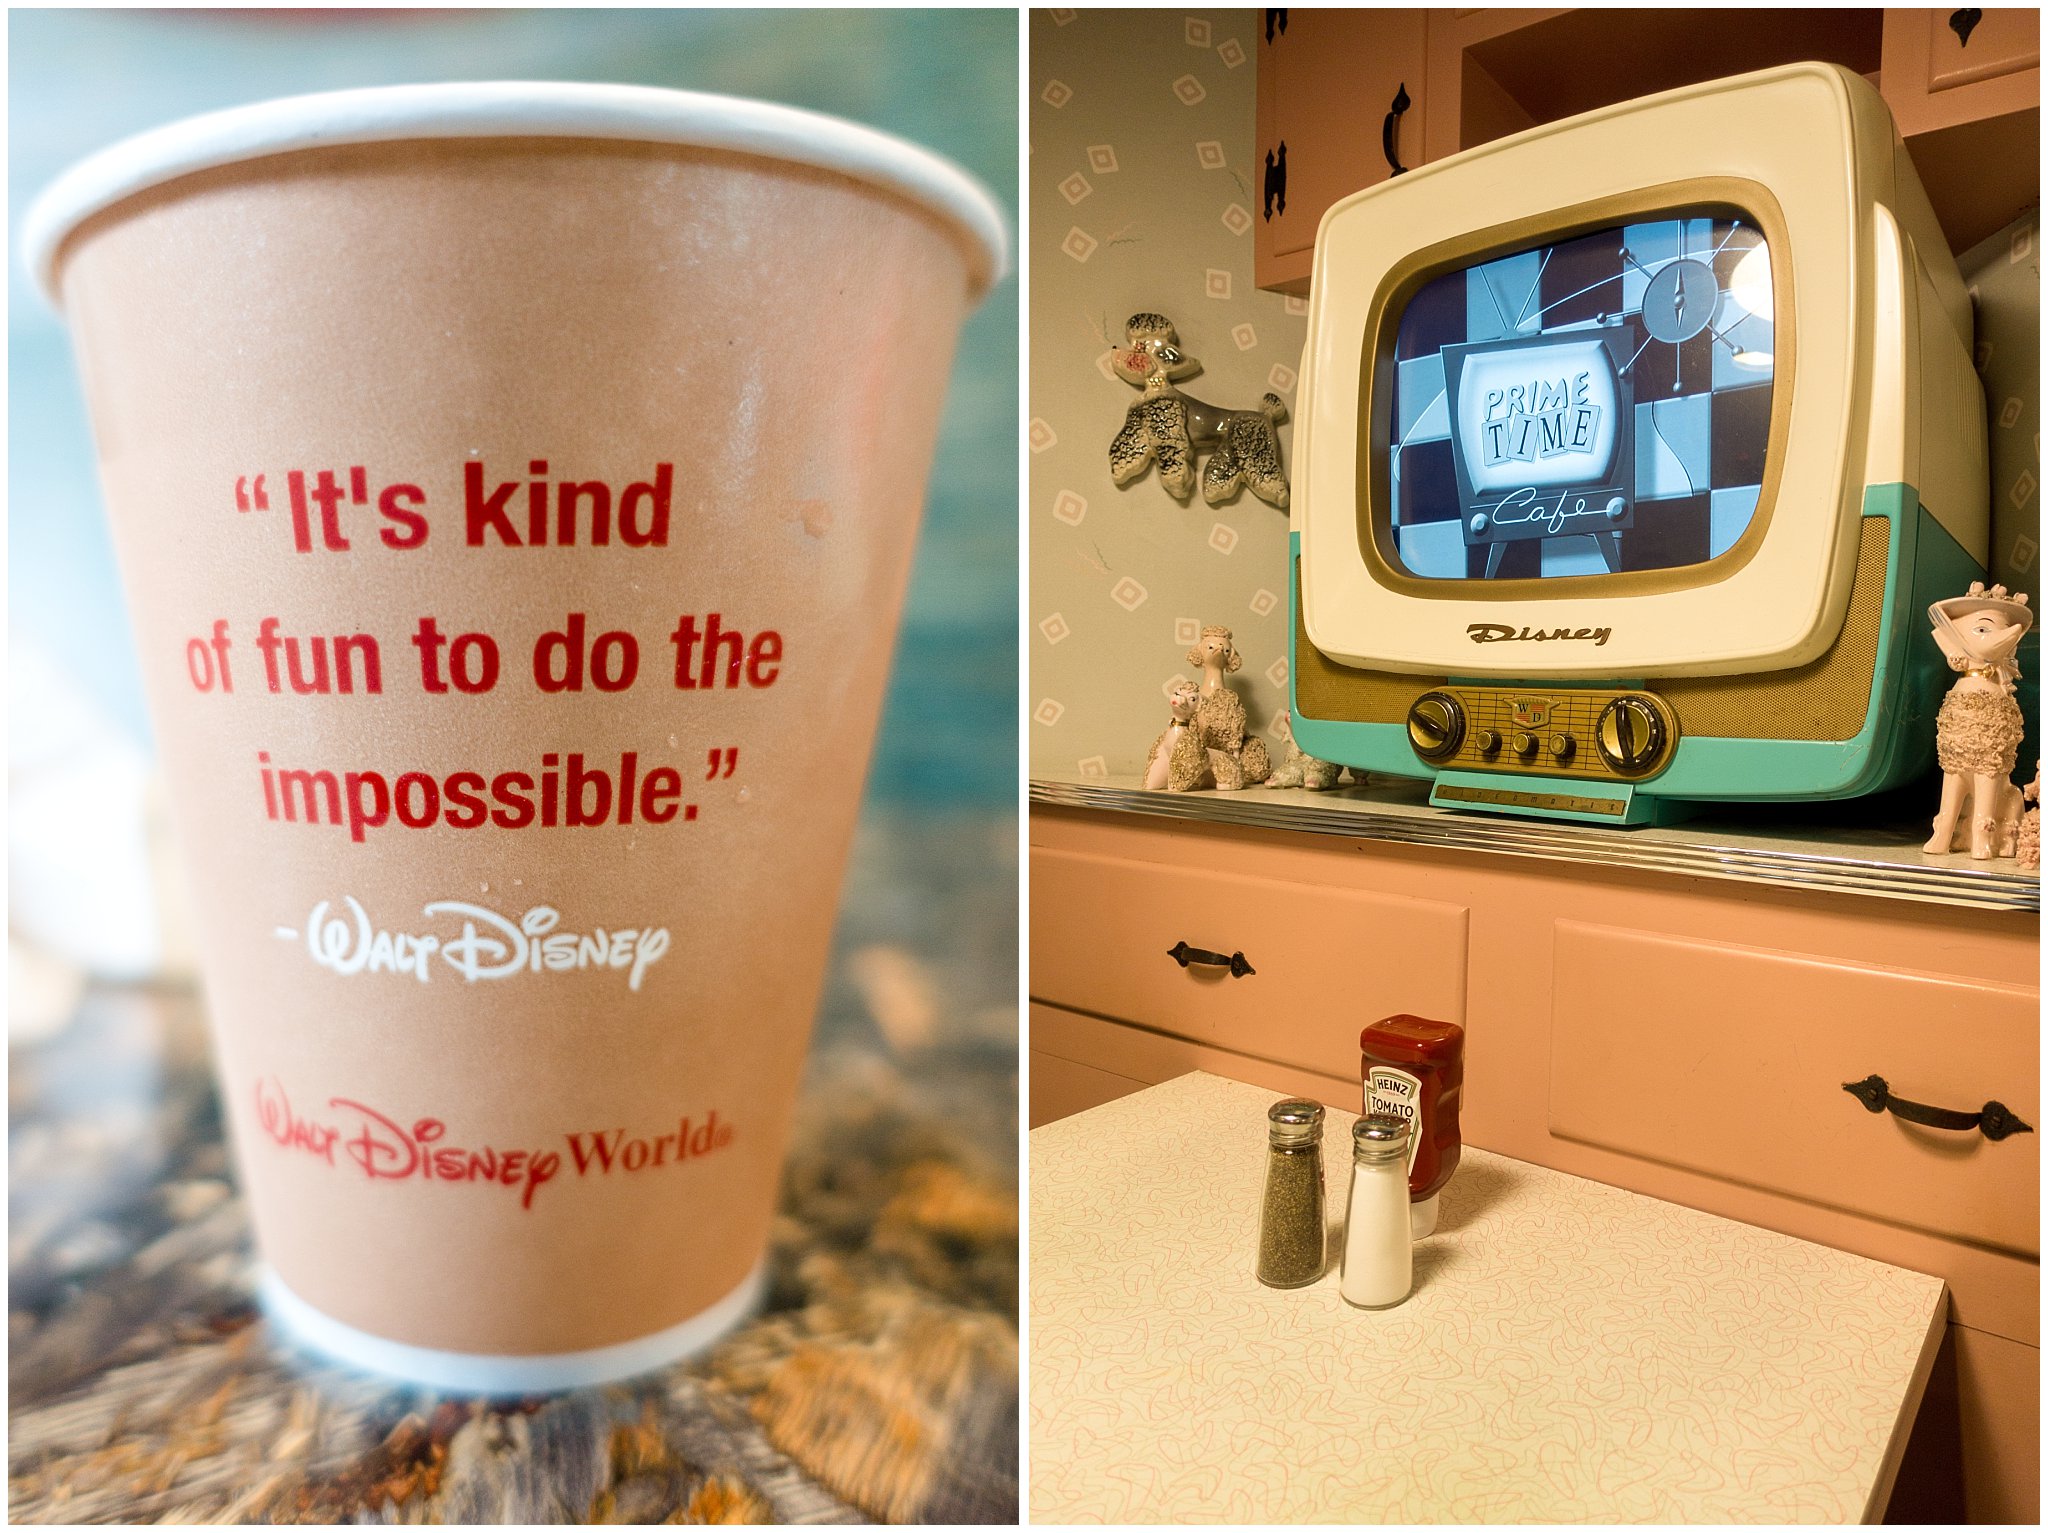 Disney cup and The 50's Prime Time Cafe